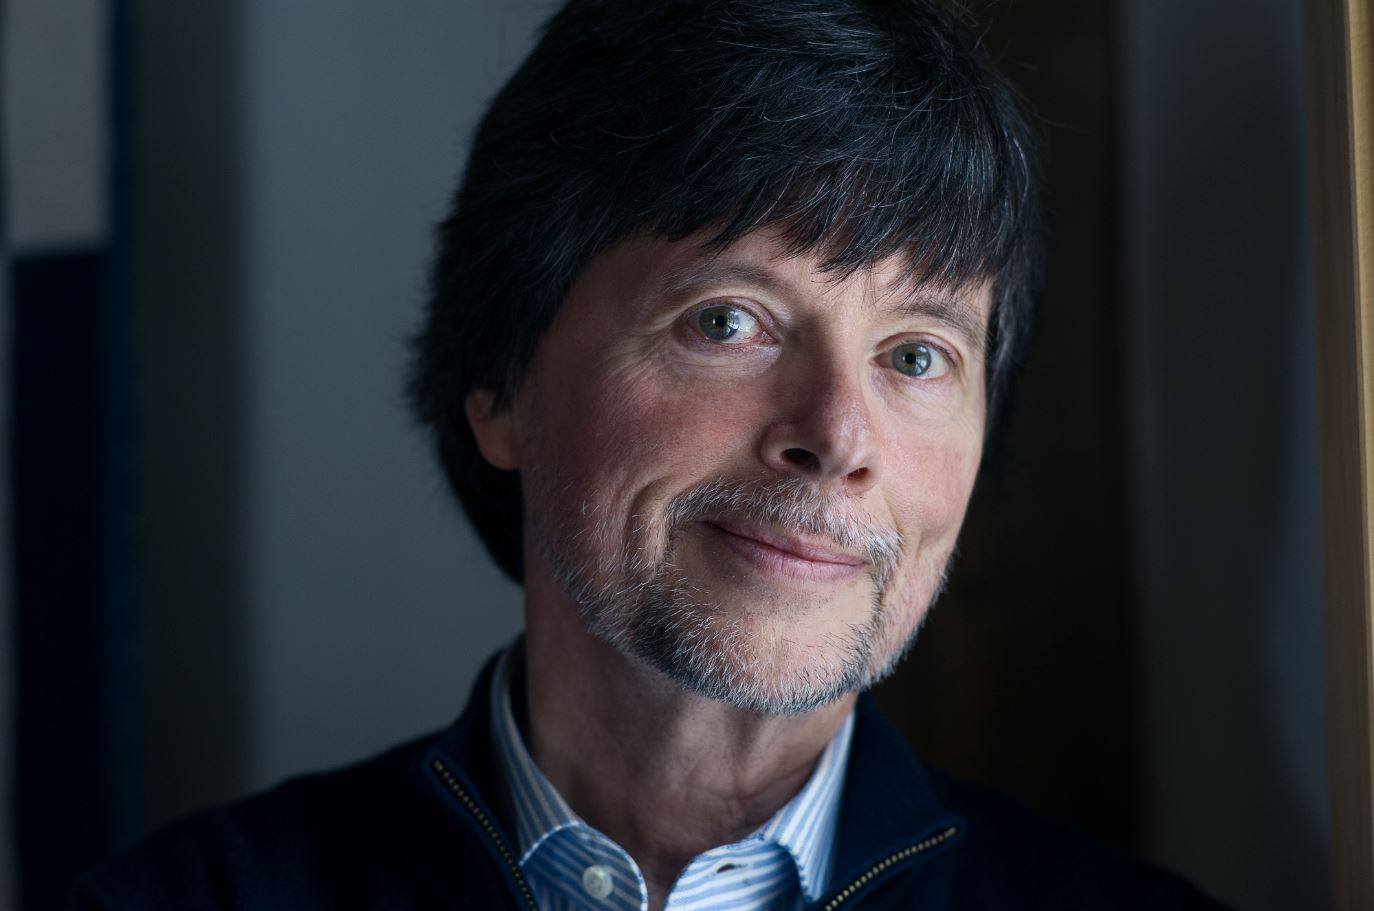 Bank of America Funded Holocaust Documentary By Ken Burns